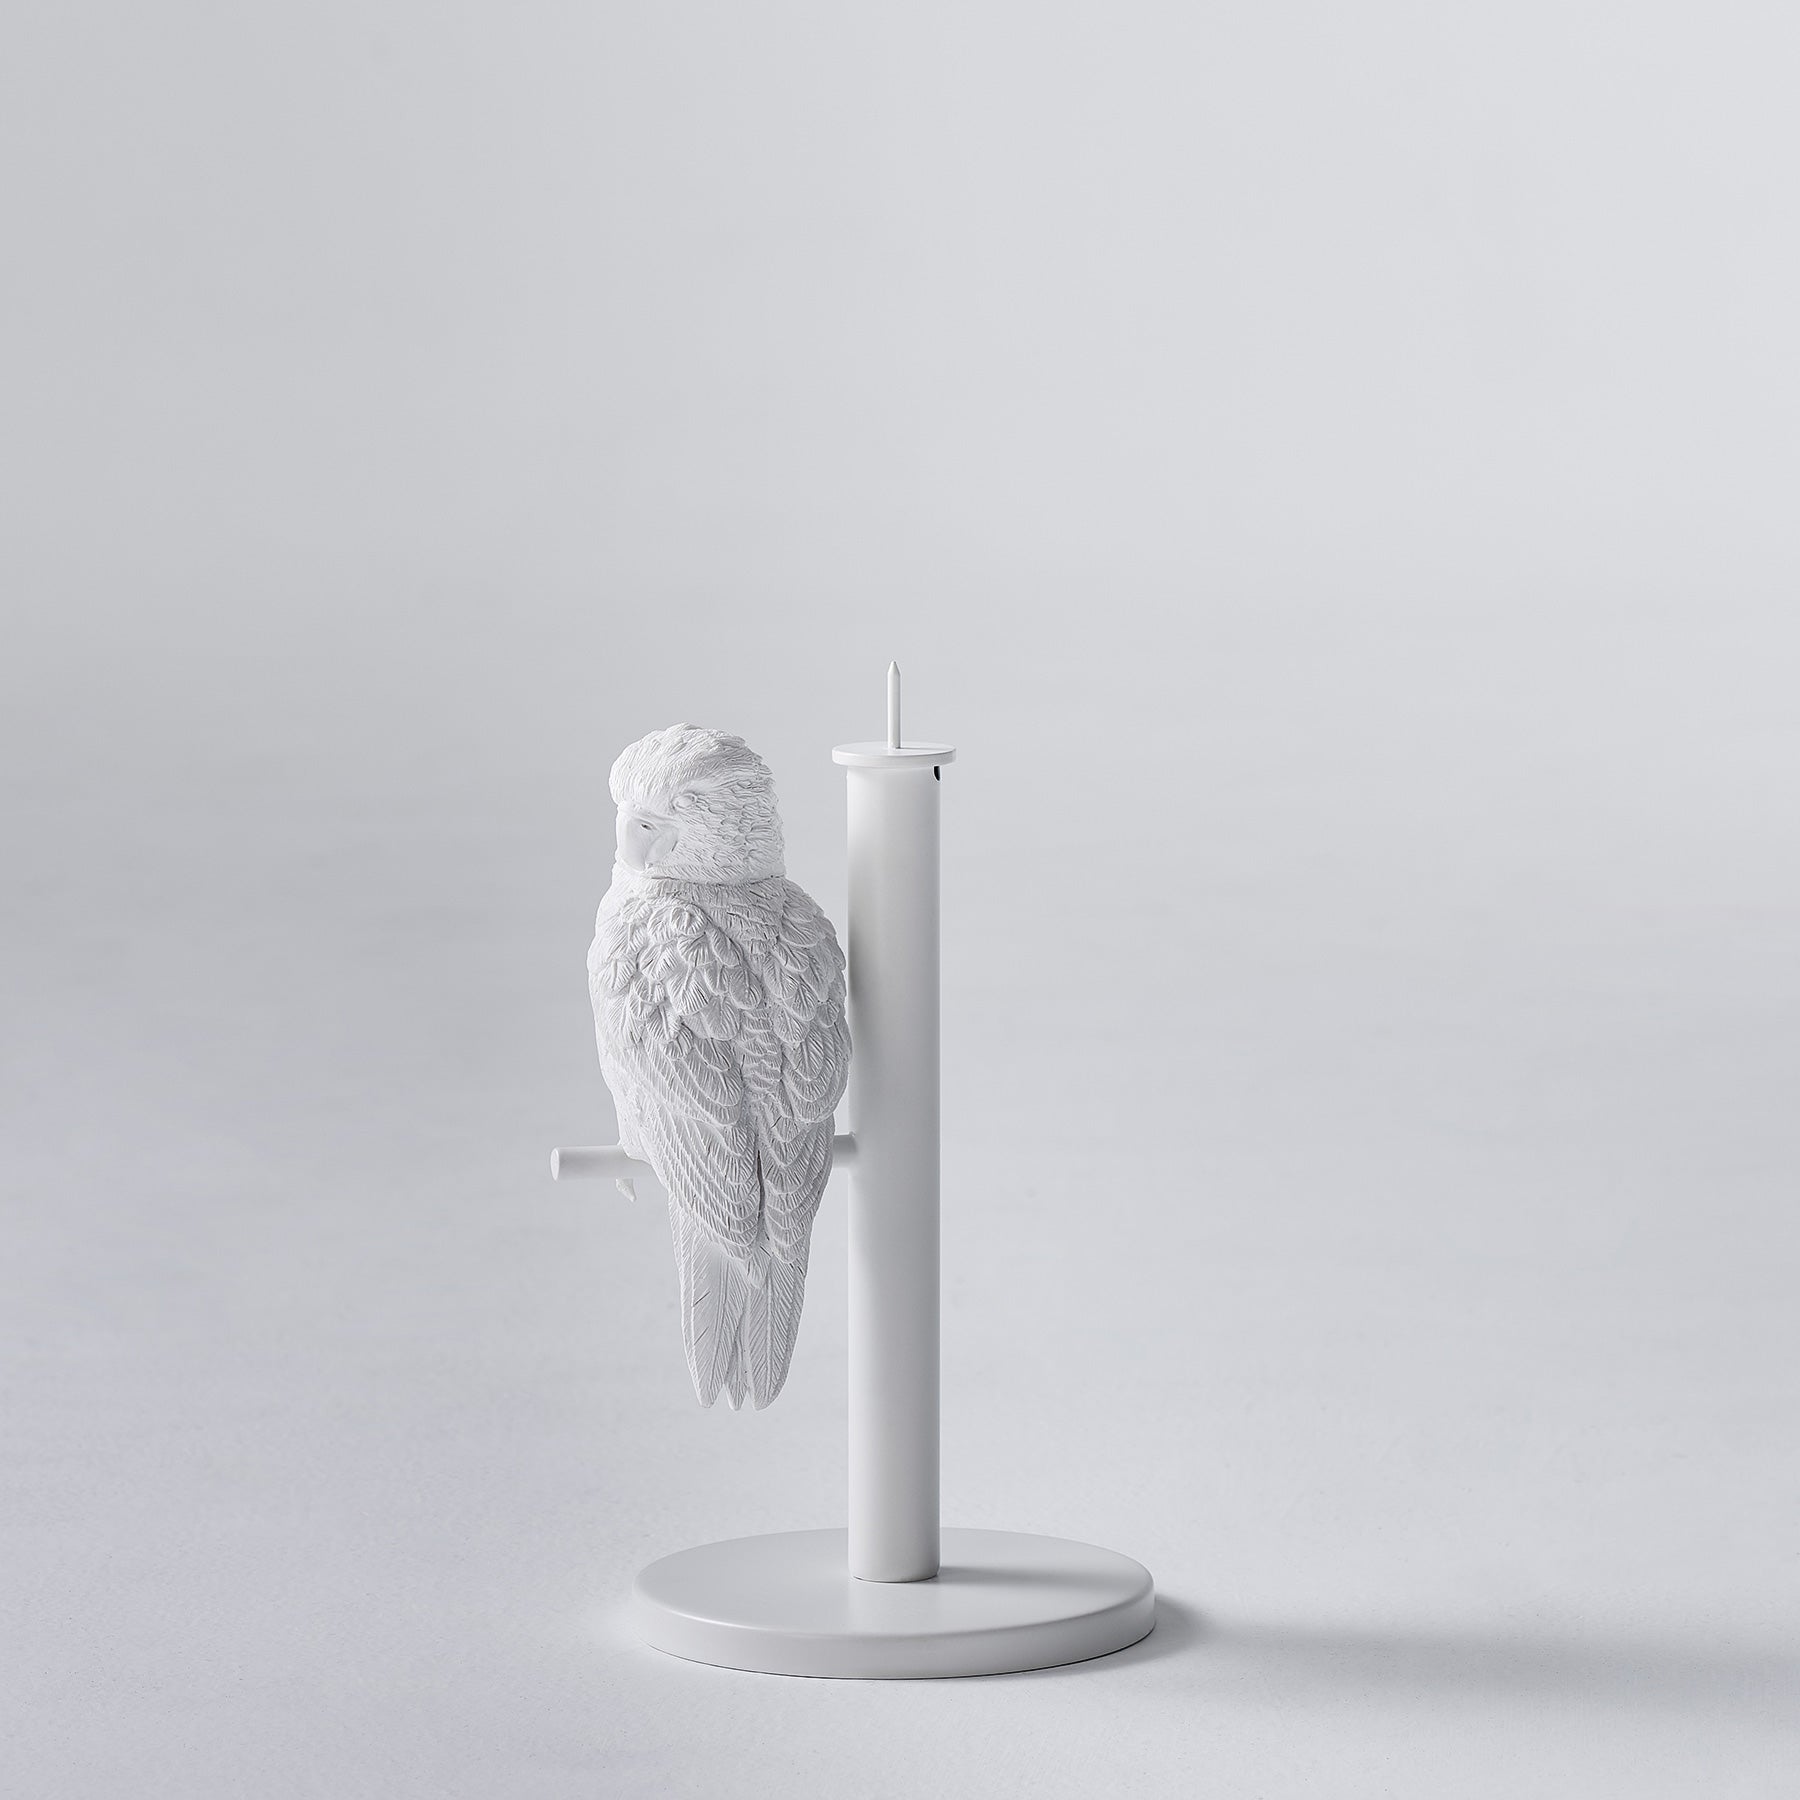 White Candle Holder with Resin Parrot Sculpture for Home Decor Accessories Invite Parrots to Chat or Dinner in Peace & Naturality